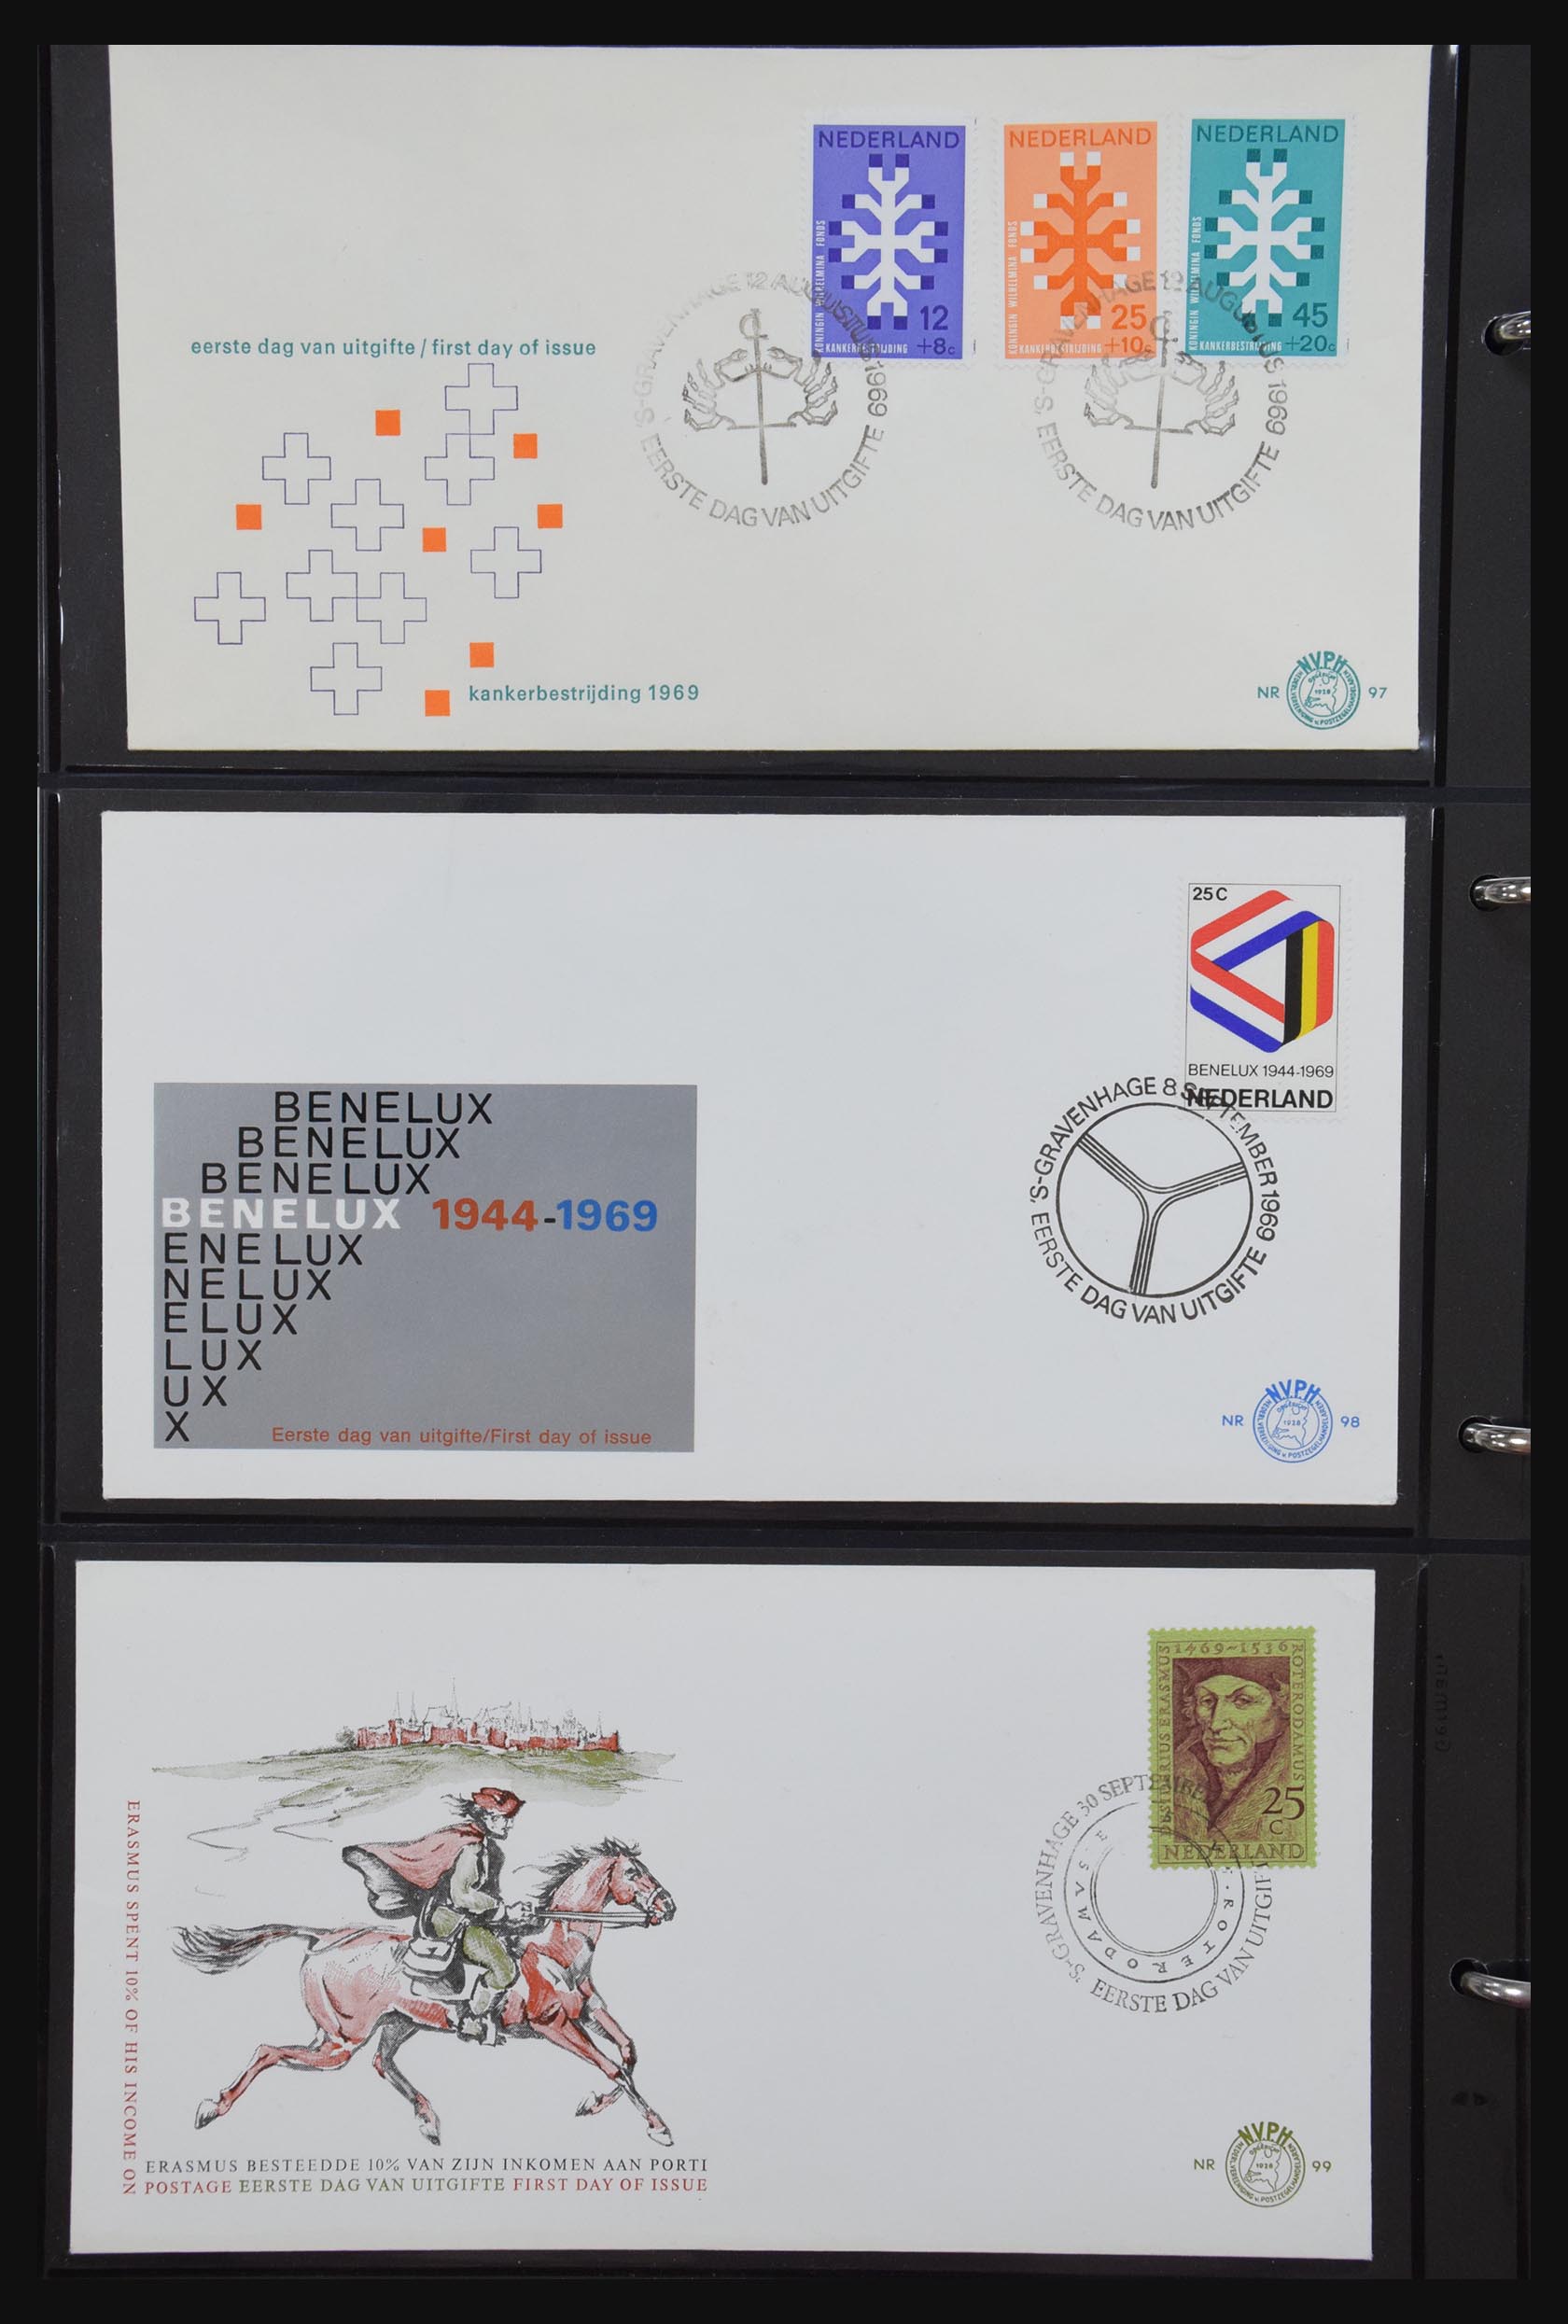 31098 034 - 31098 Netherlands FDC's 1950-2015.